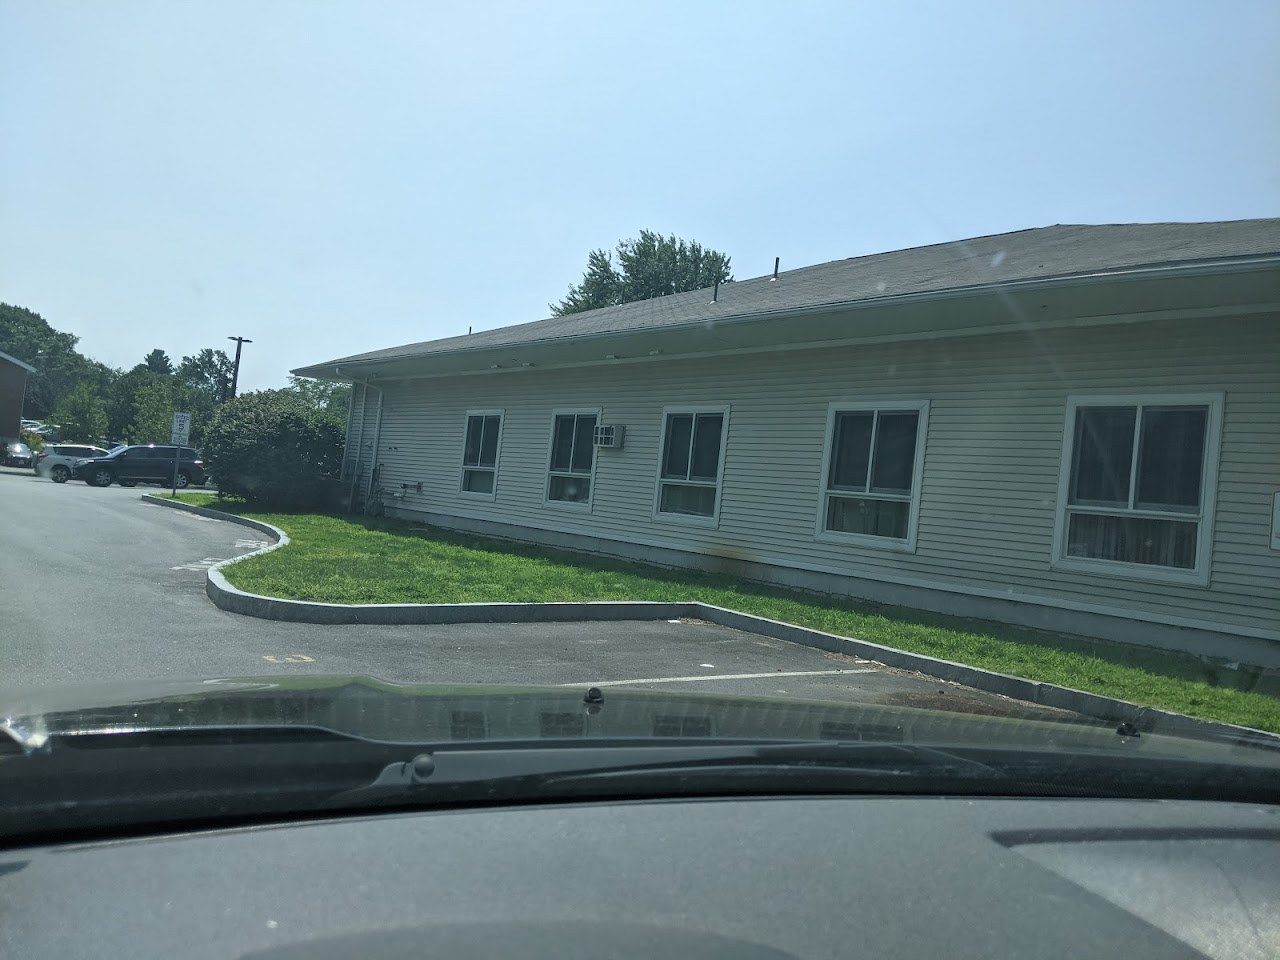 Photo of Methuen Housing Authority. Affordable housing located at 25 JADE Street METHUEN, MA 1844